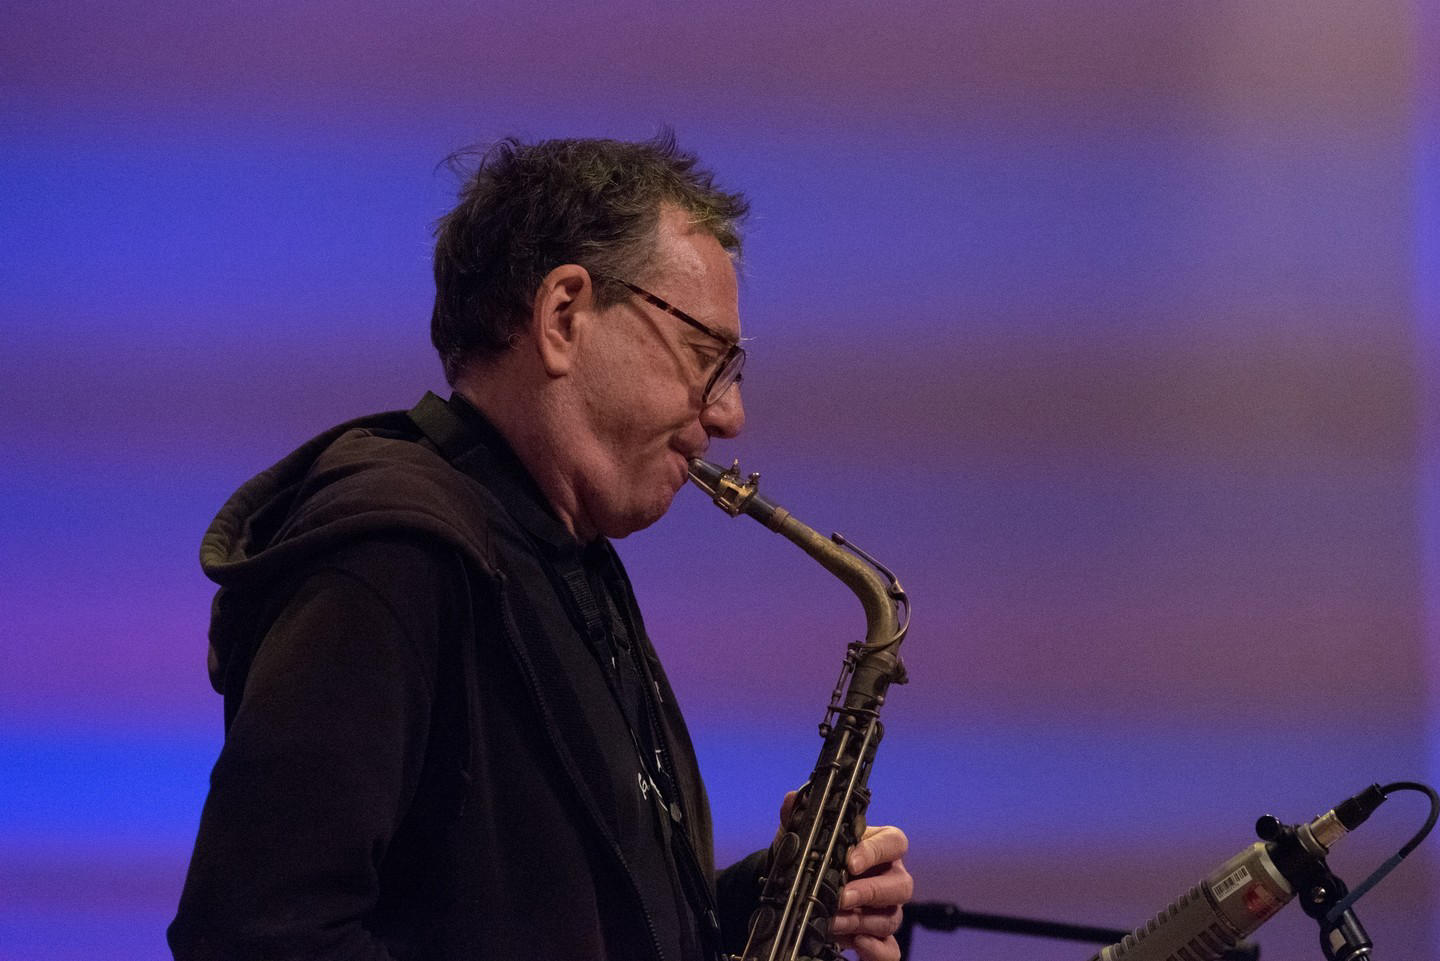 “This is not entertainment,” composer John Zorn declared during an onstage interview at the 2022 Big